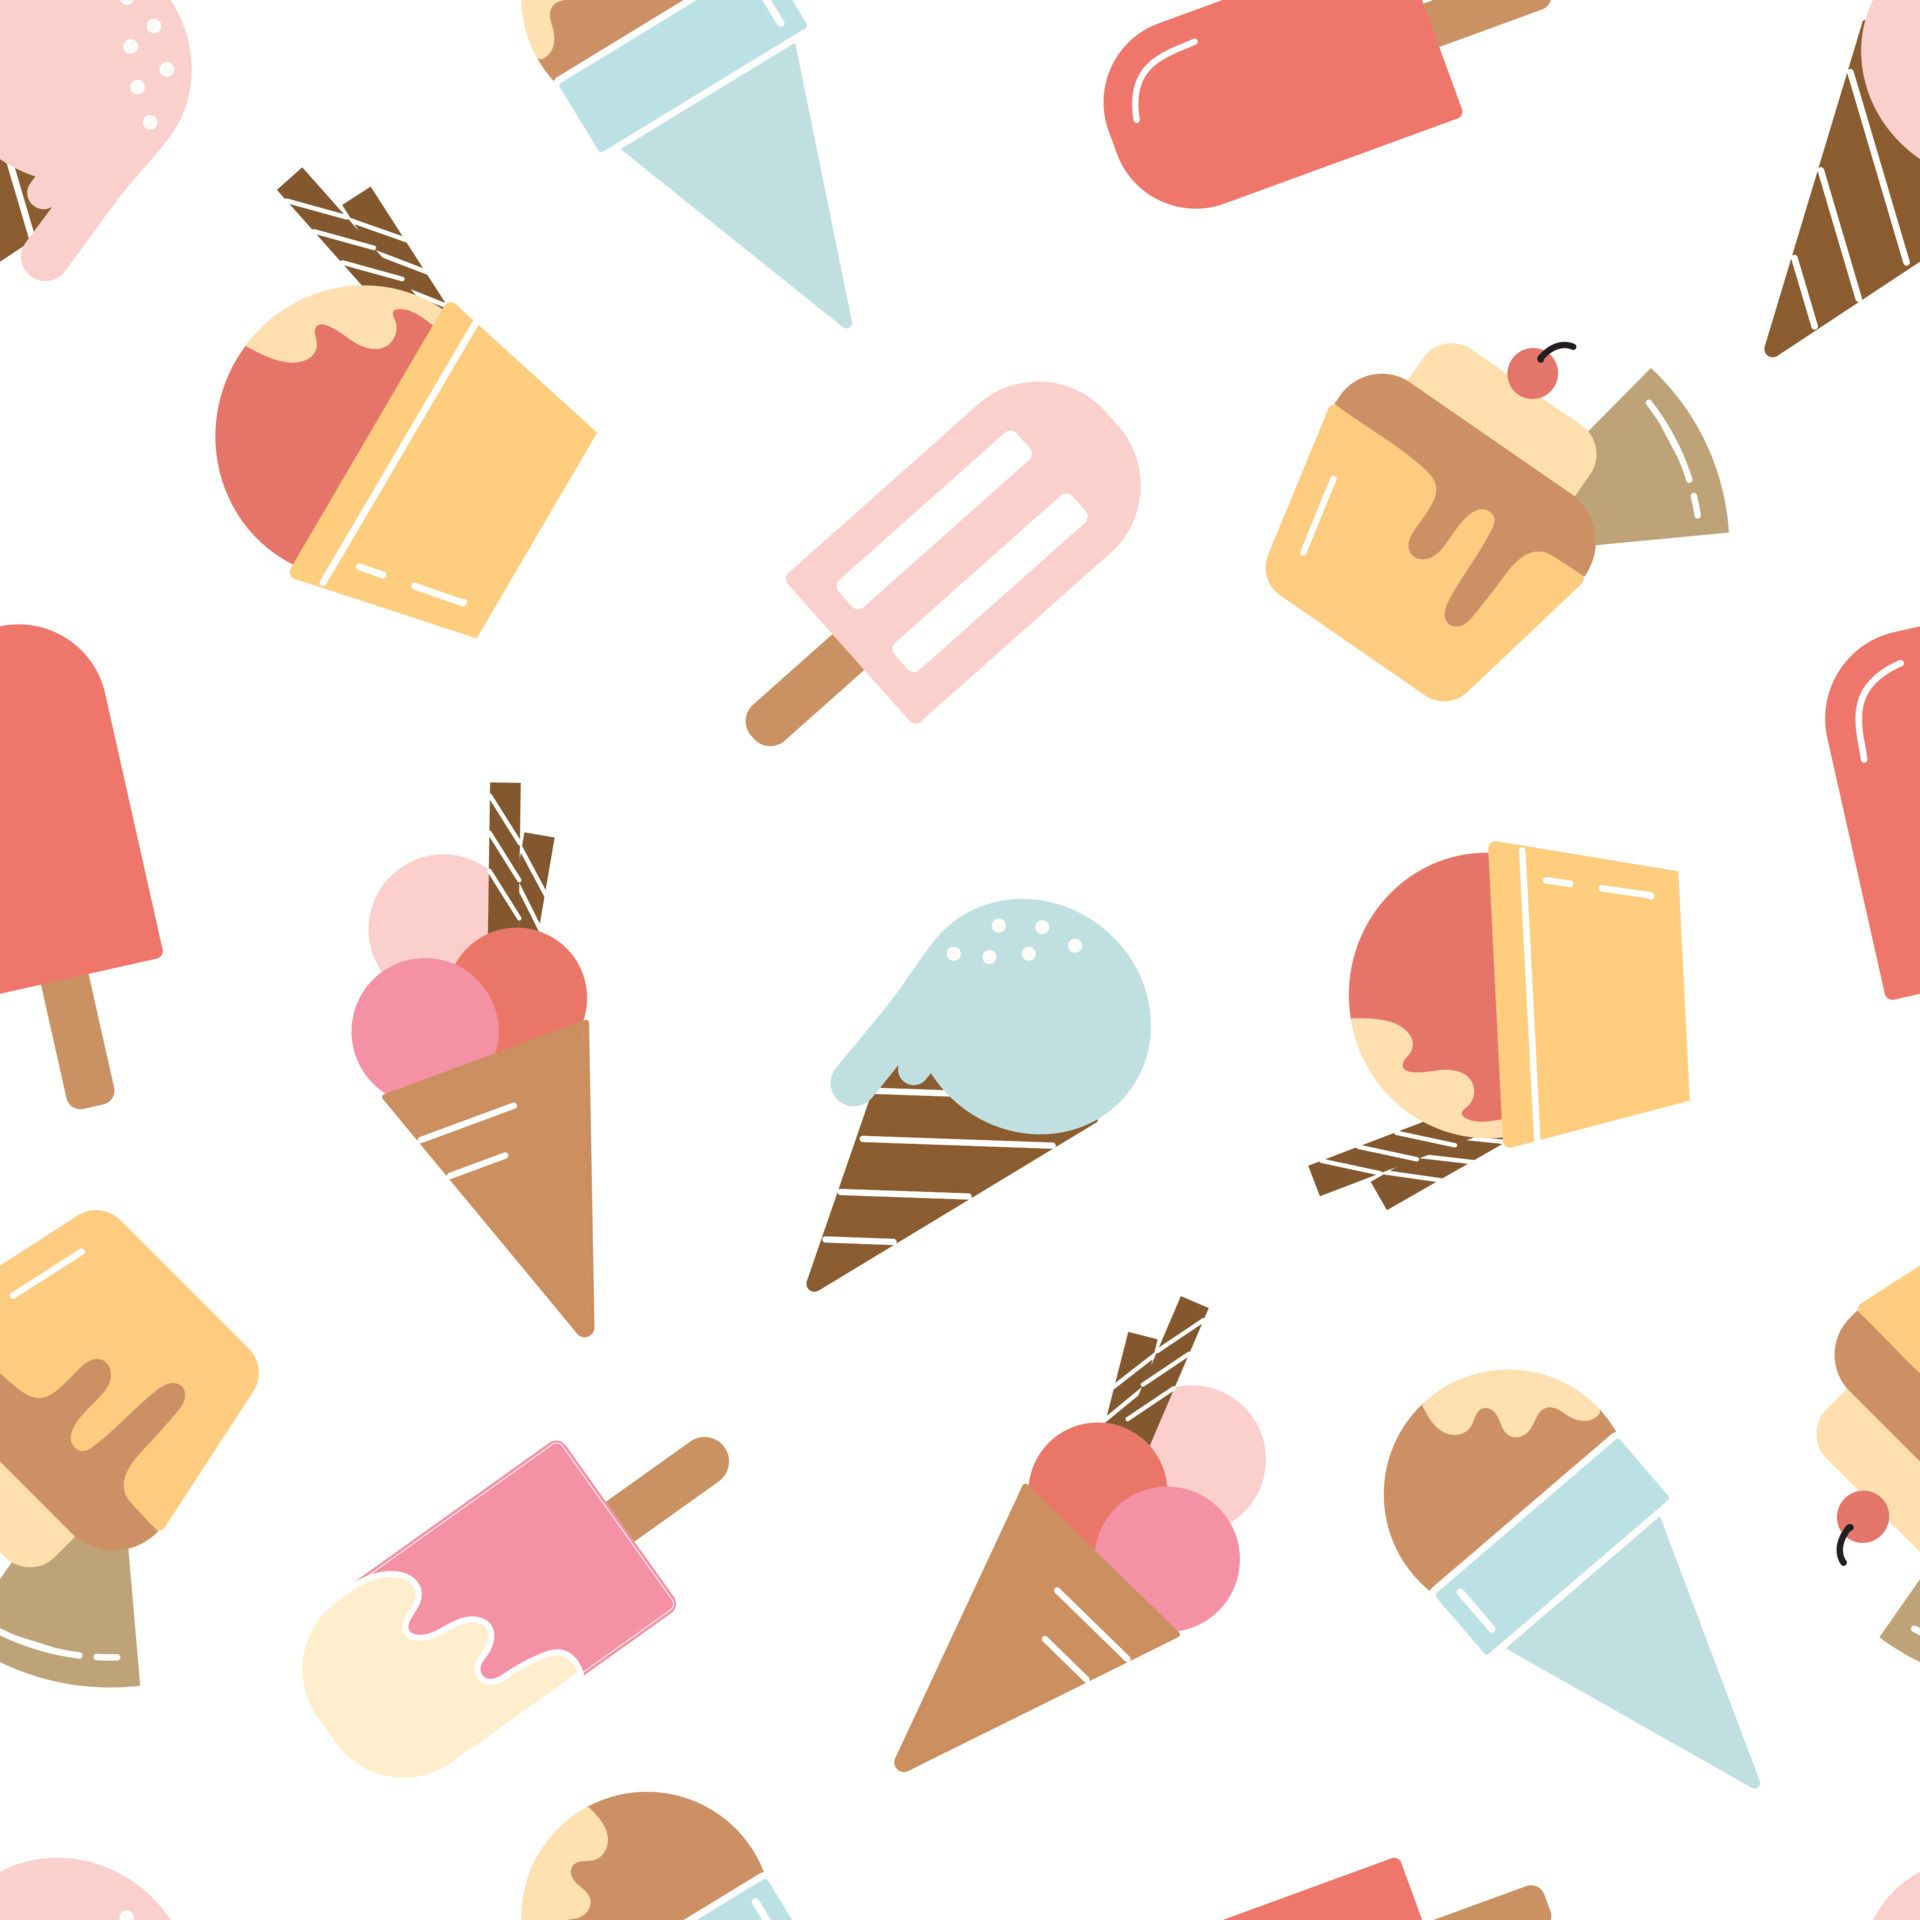 An illustration of various ice cream cones in different colors and sizes - Ice cream